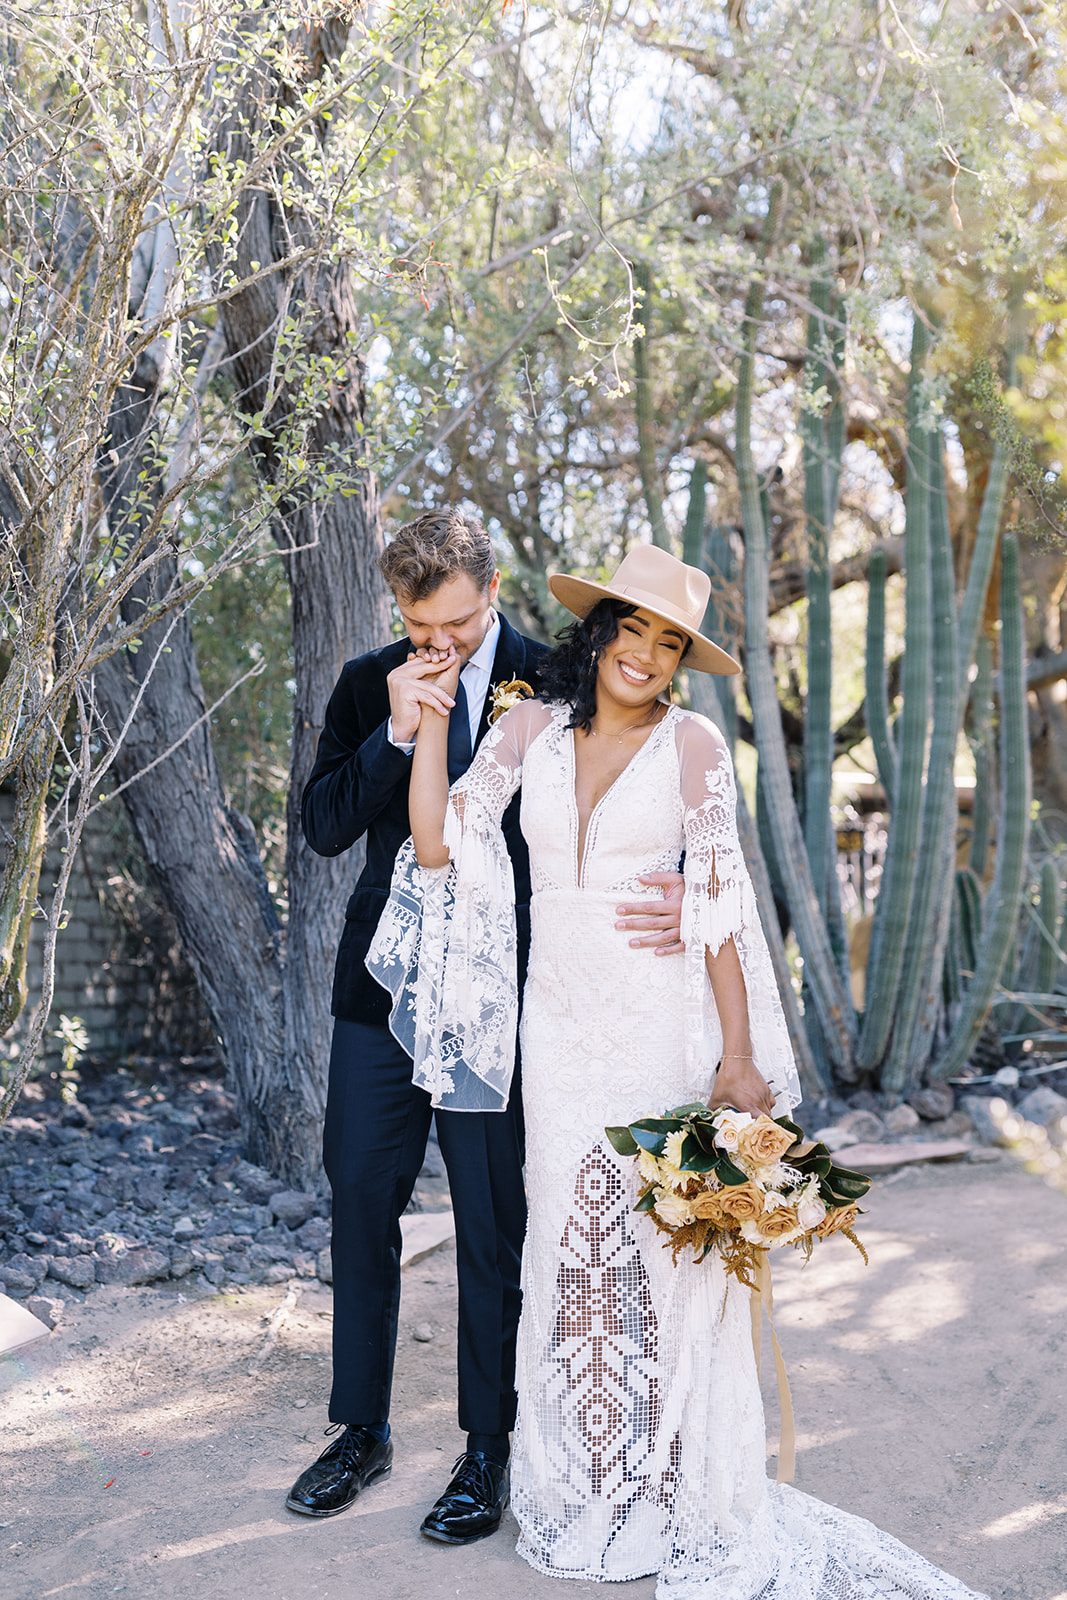 Man is kissing woman's hand while standing in the desert surrounded by cacti and trees. Desert elopement planning tips. Elopement photographer in Texas